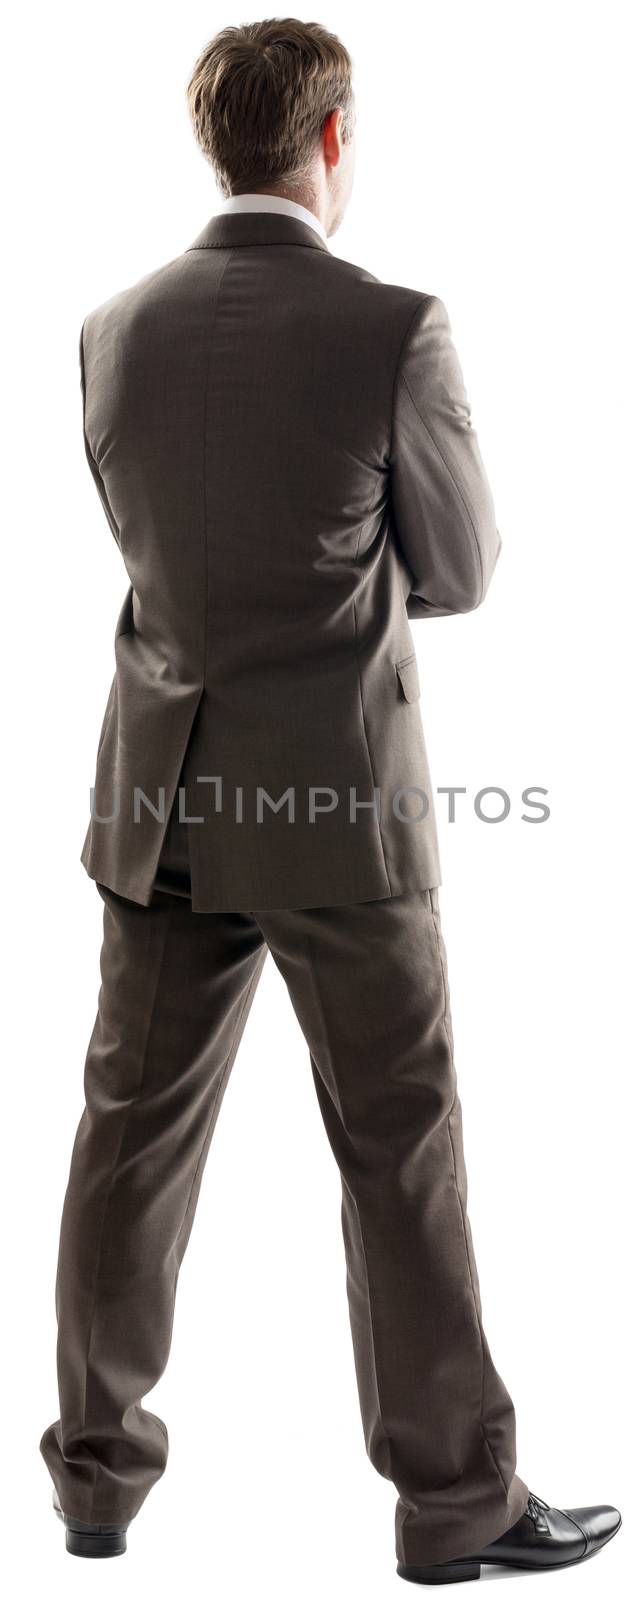 Rear view image of young male business executive isolated on white background